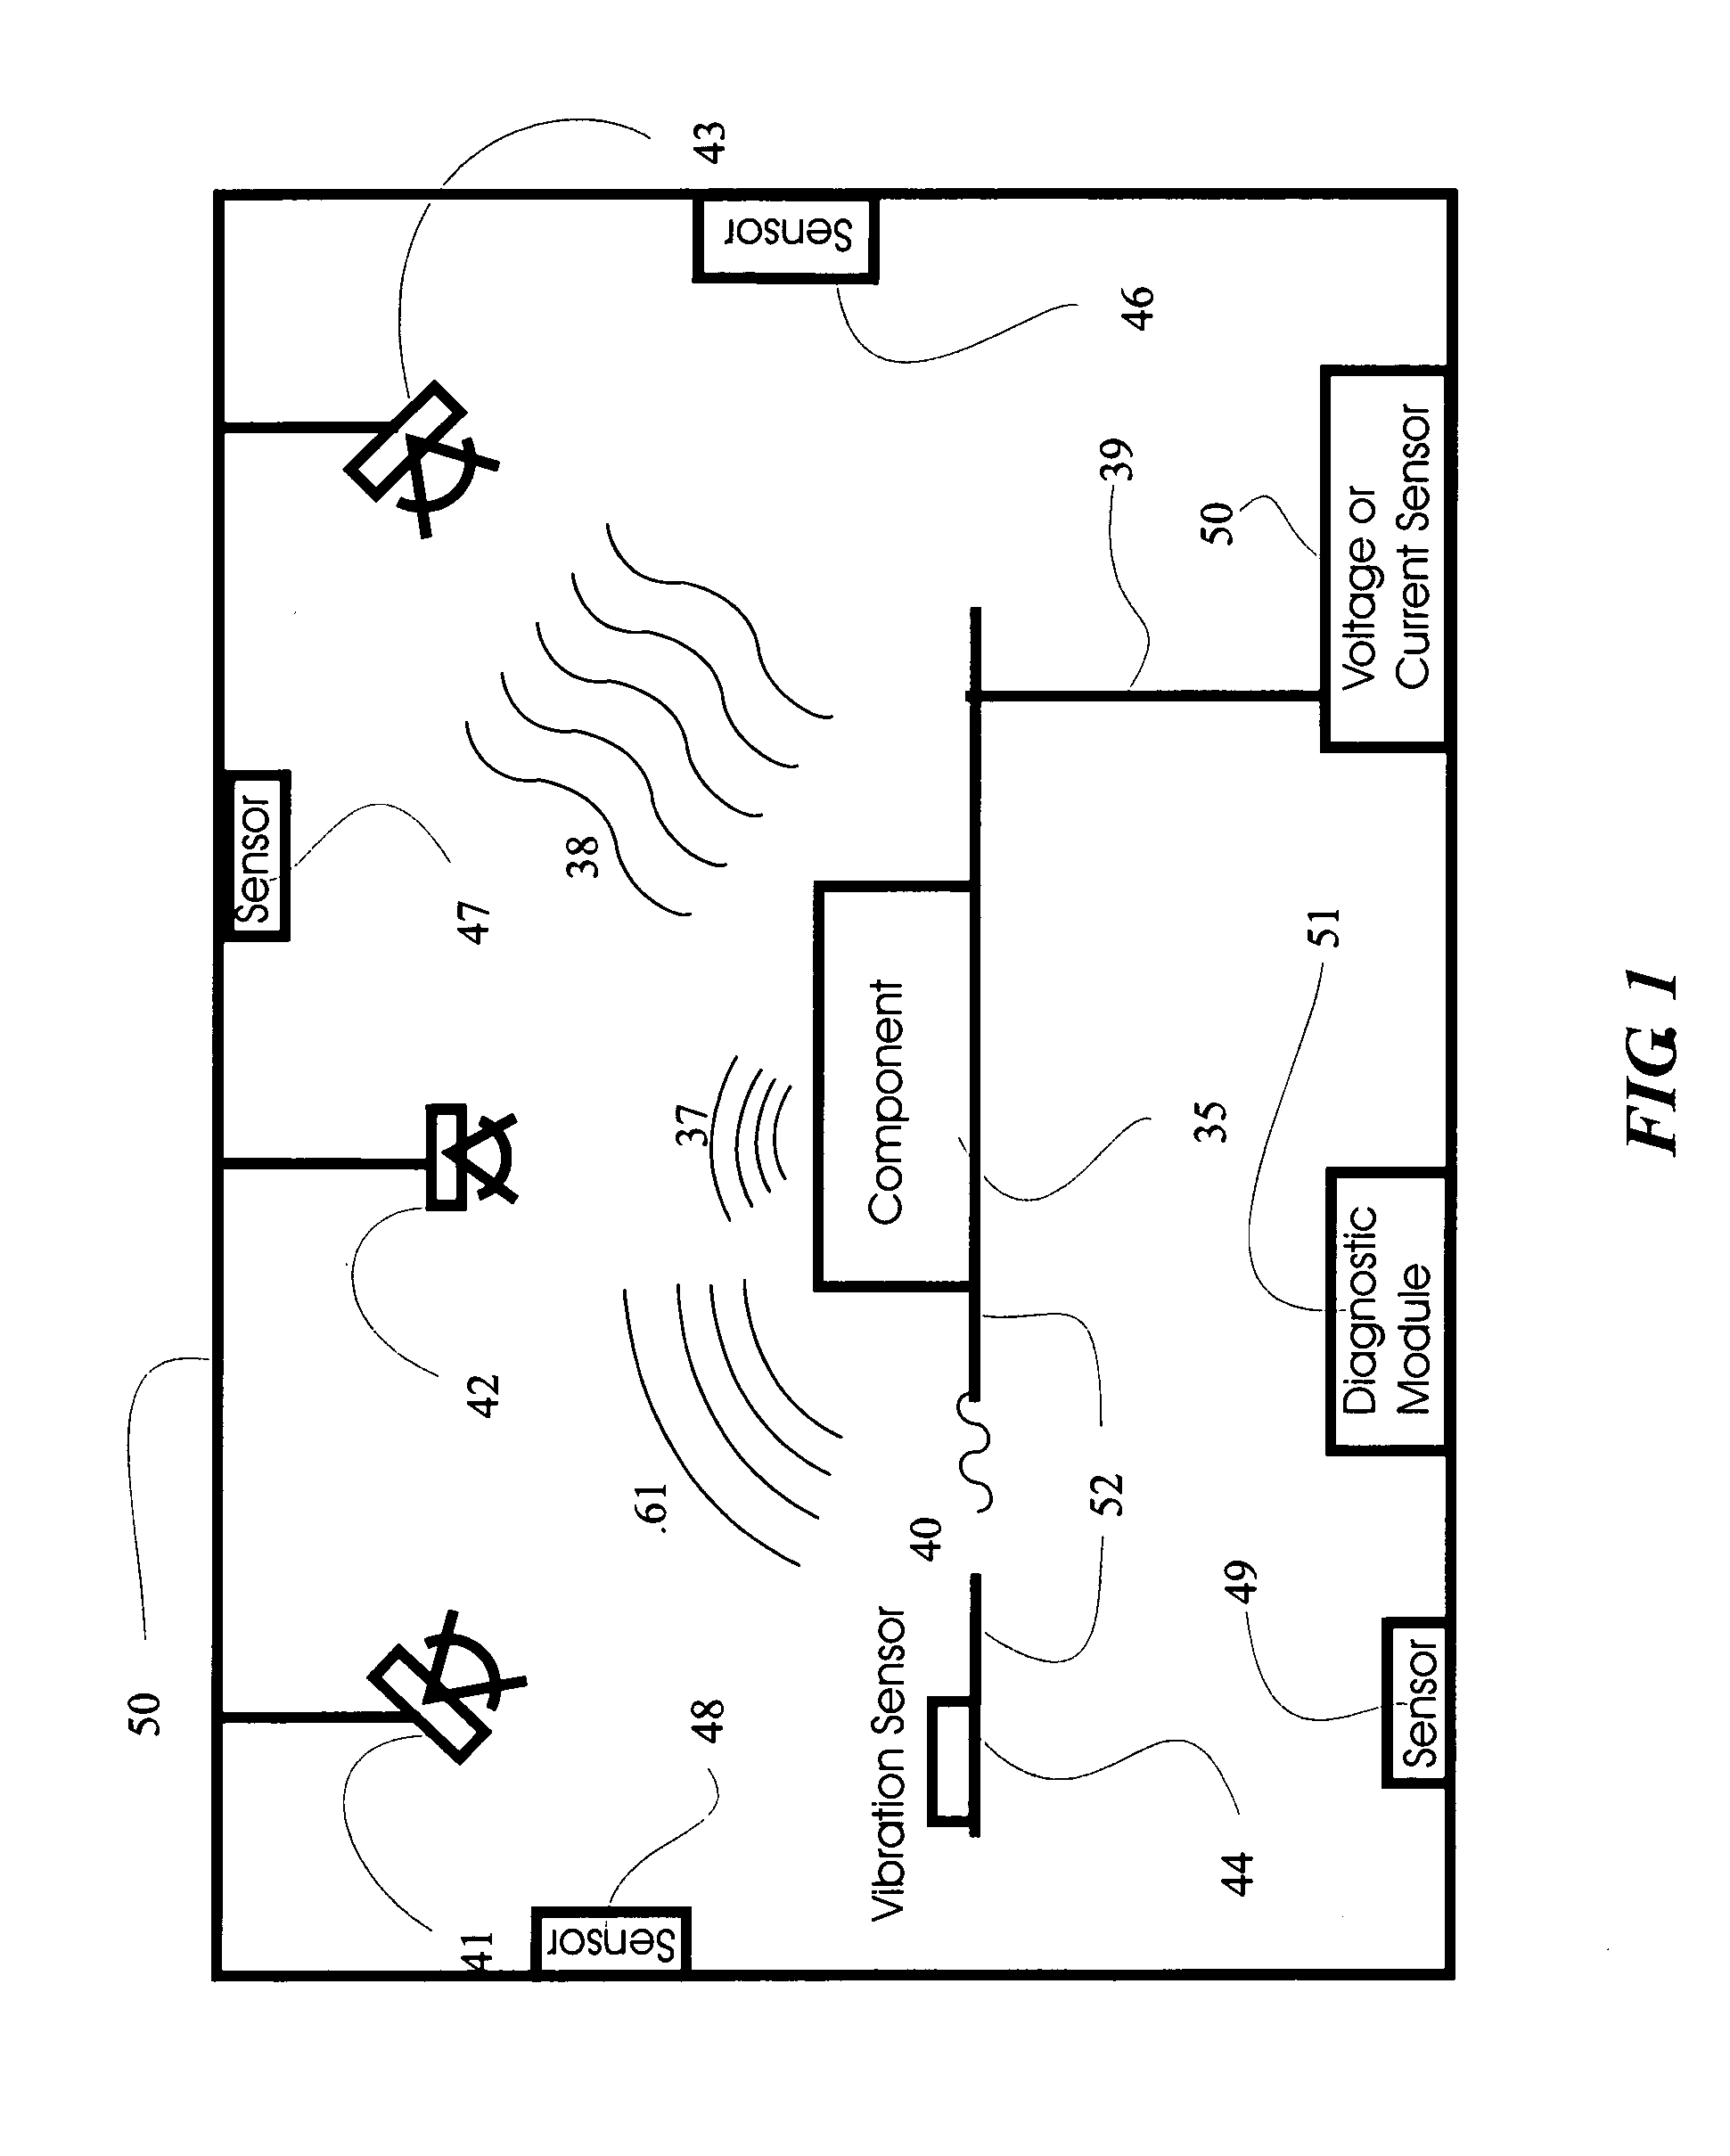 Vehicular information and monitoring system and methods